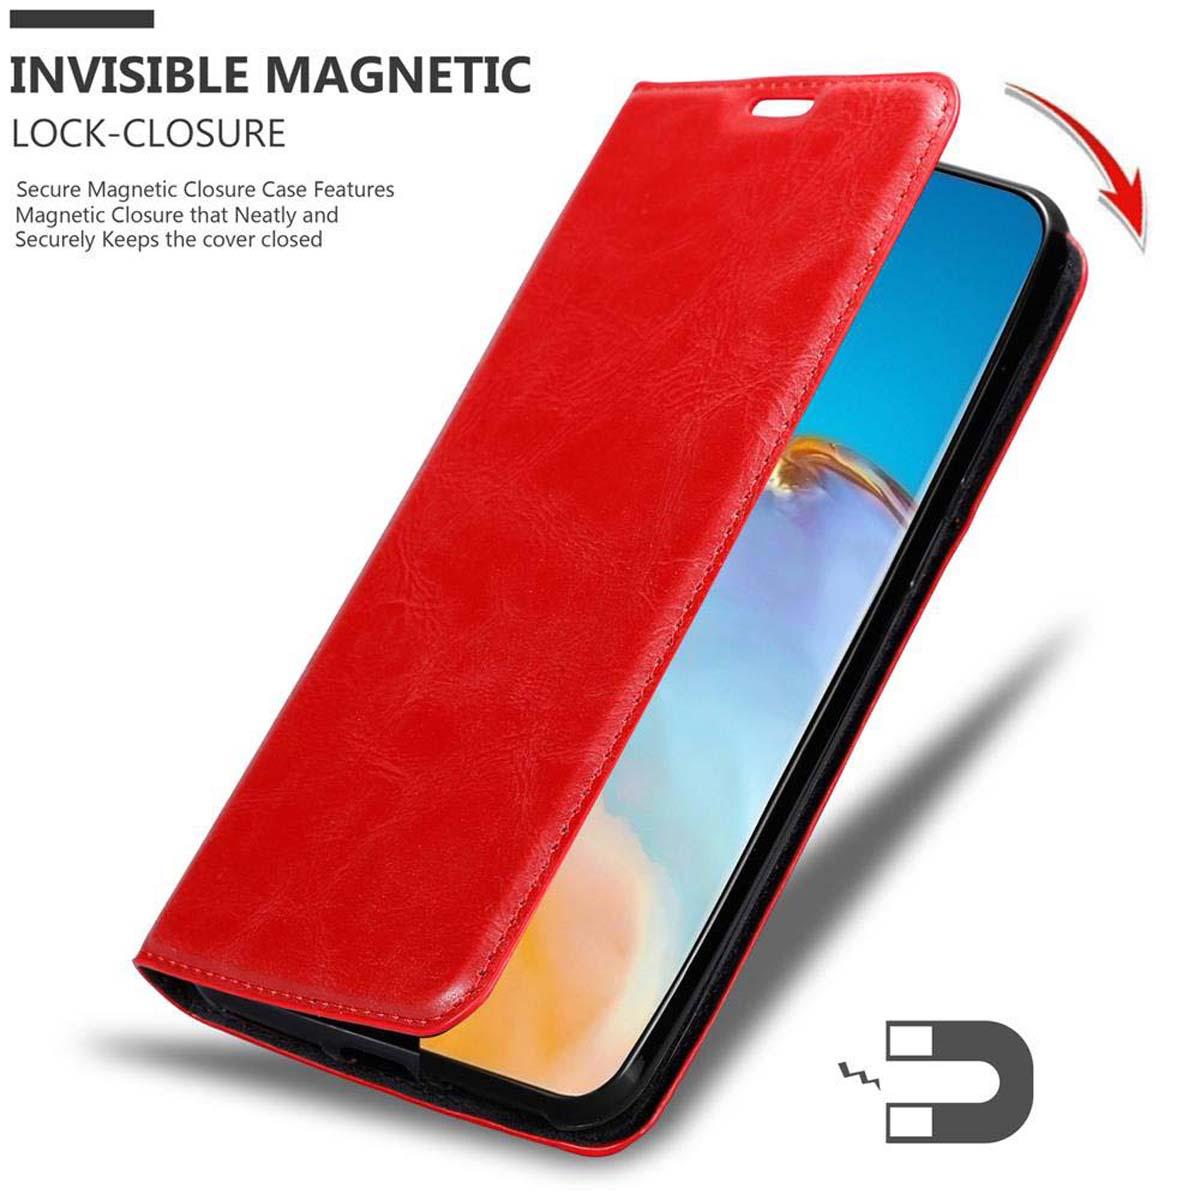 ROT Invisible APFEL Bookcover, PRO+, P40 Huawei, / Book PRO Hülle P40 Magnet, CADORABO